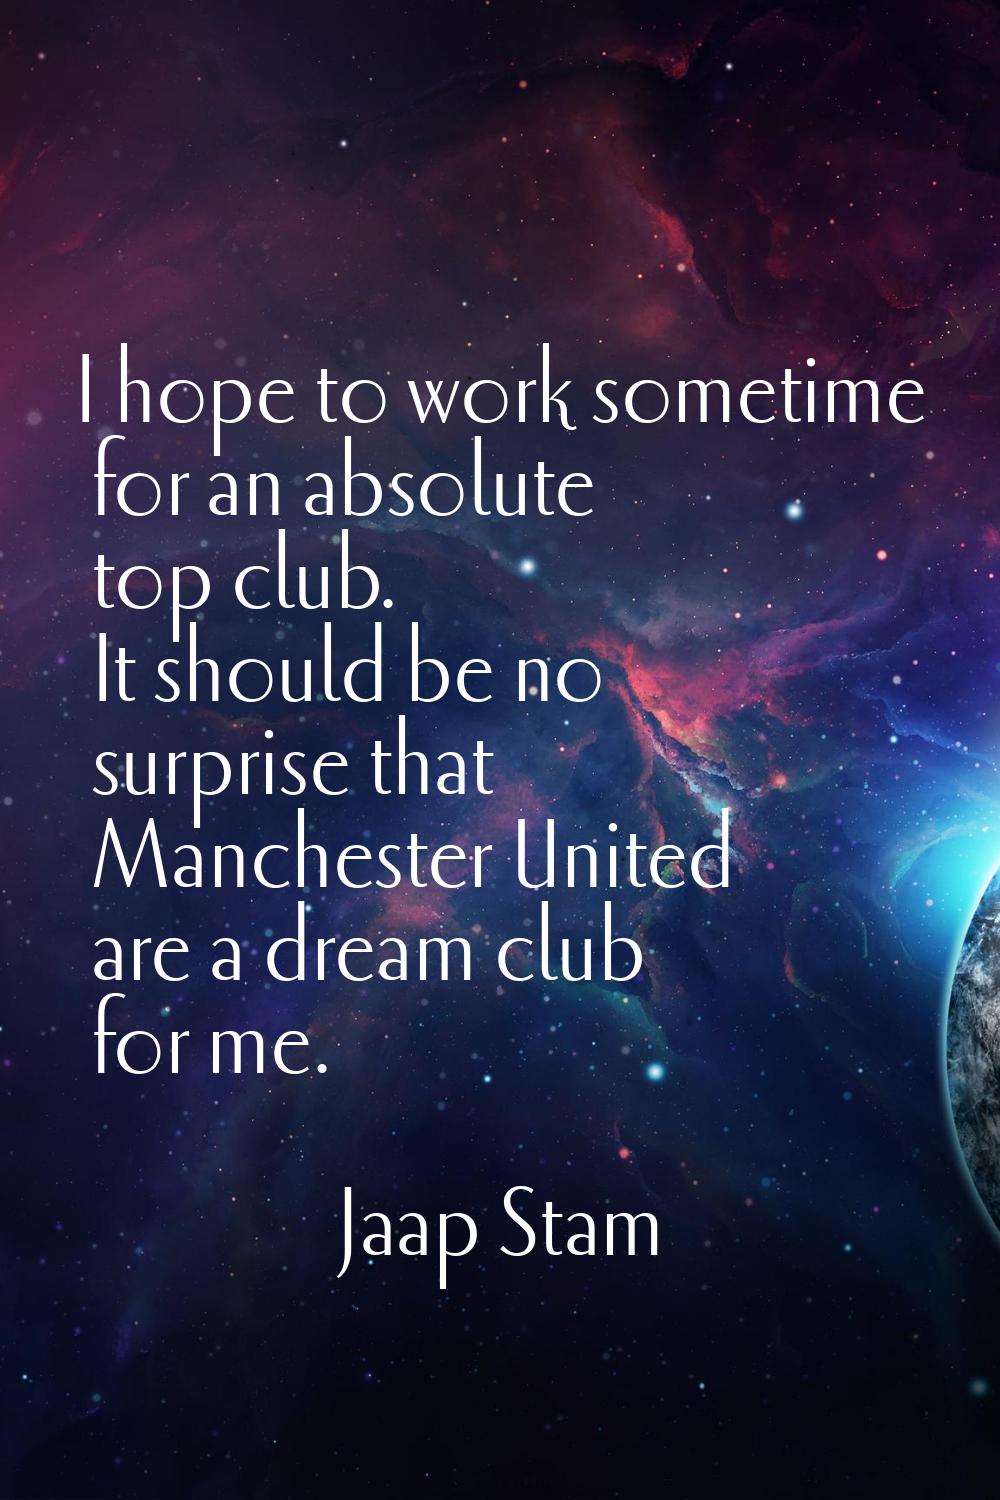 I hope to work sometime for an absolute top club. It should be no surprise that Manchester United a